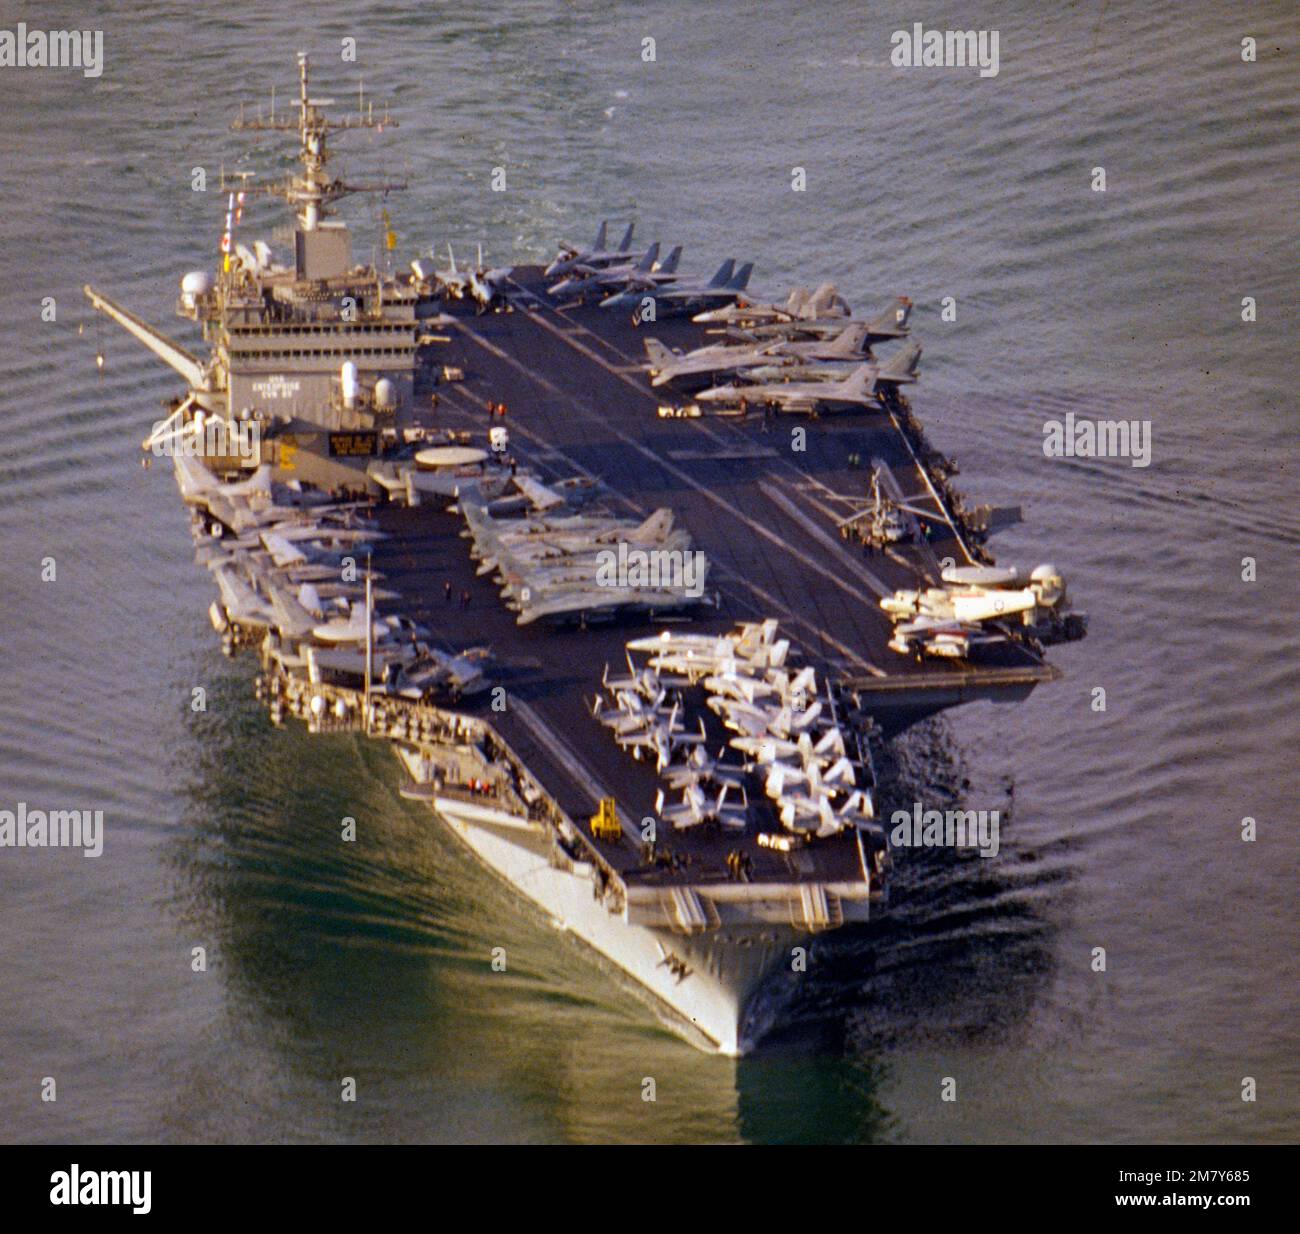 USS Enterprise (CVN-65), formerly CVA(N)-65, is a decommissioned. United States Navy aircraft carrier. In 1958, she was the first nuclear-powered aircraft carrier and the eighth United States naval vessel to bear the name. Like her predecessor of World War II fame, she is nicknamed Big E Stock Photo